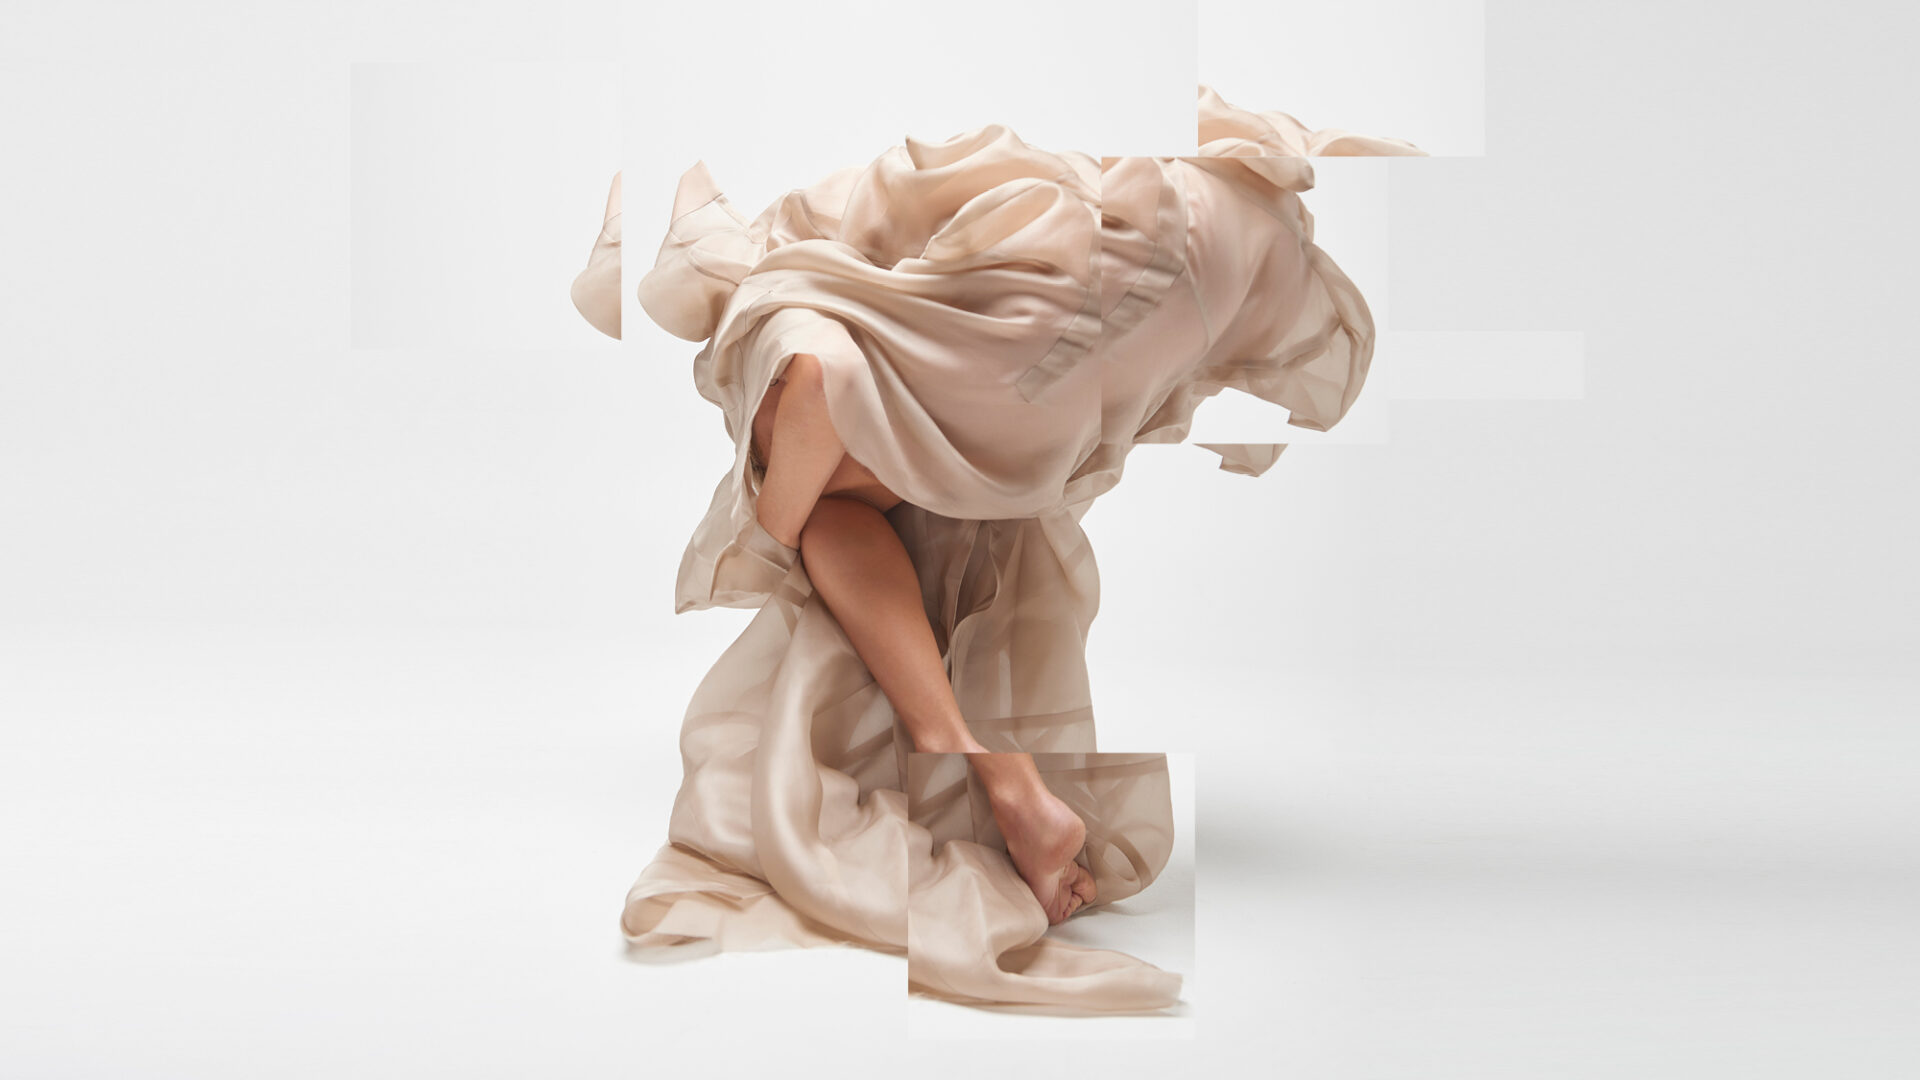 Tessellated abstract image of material draped over a leg. Independent dance program at Sydney Dance Company.